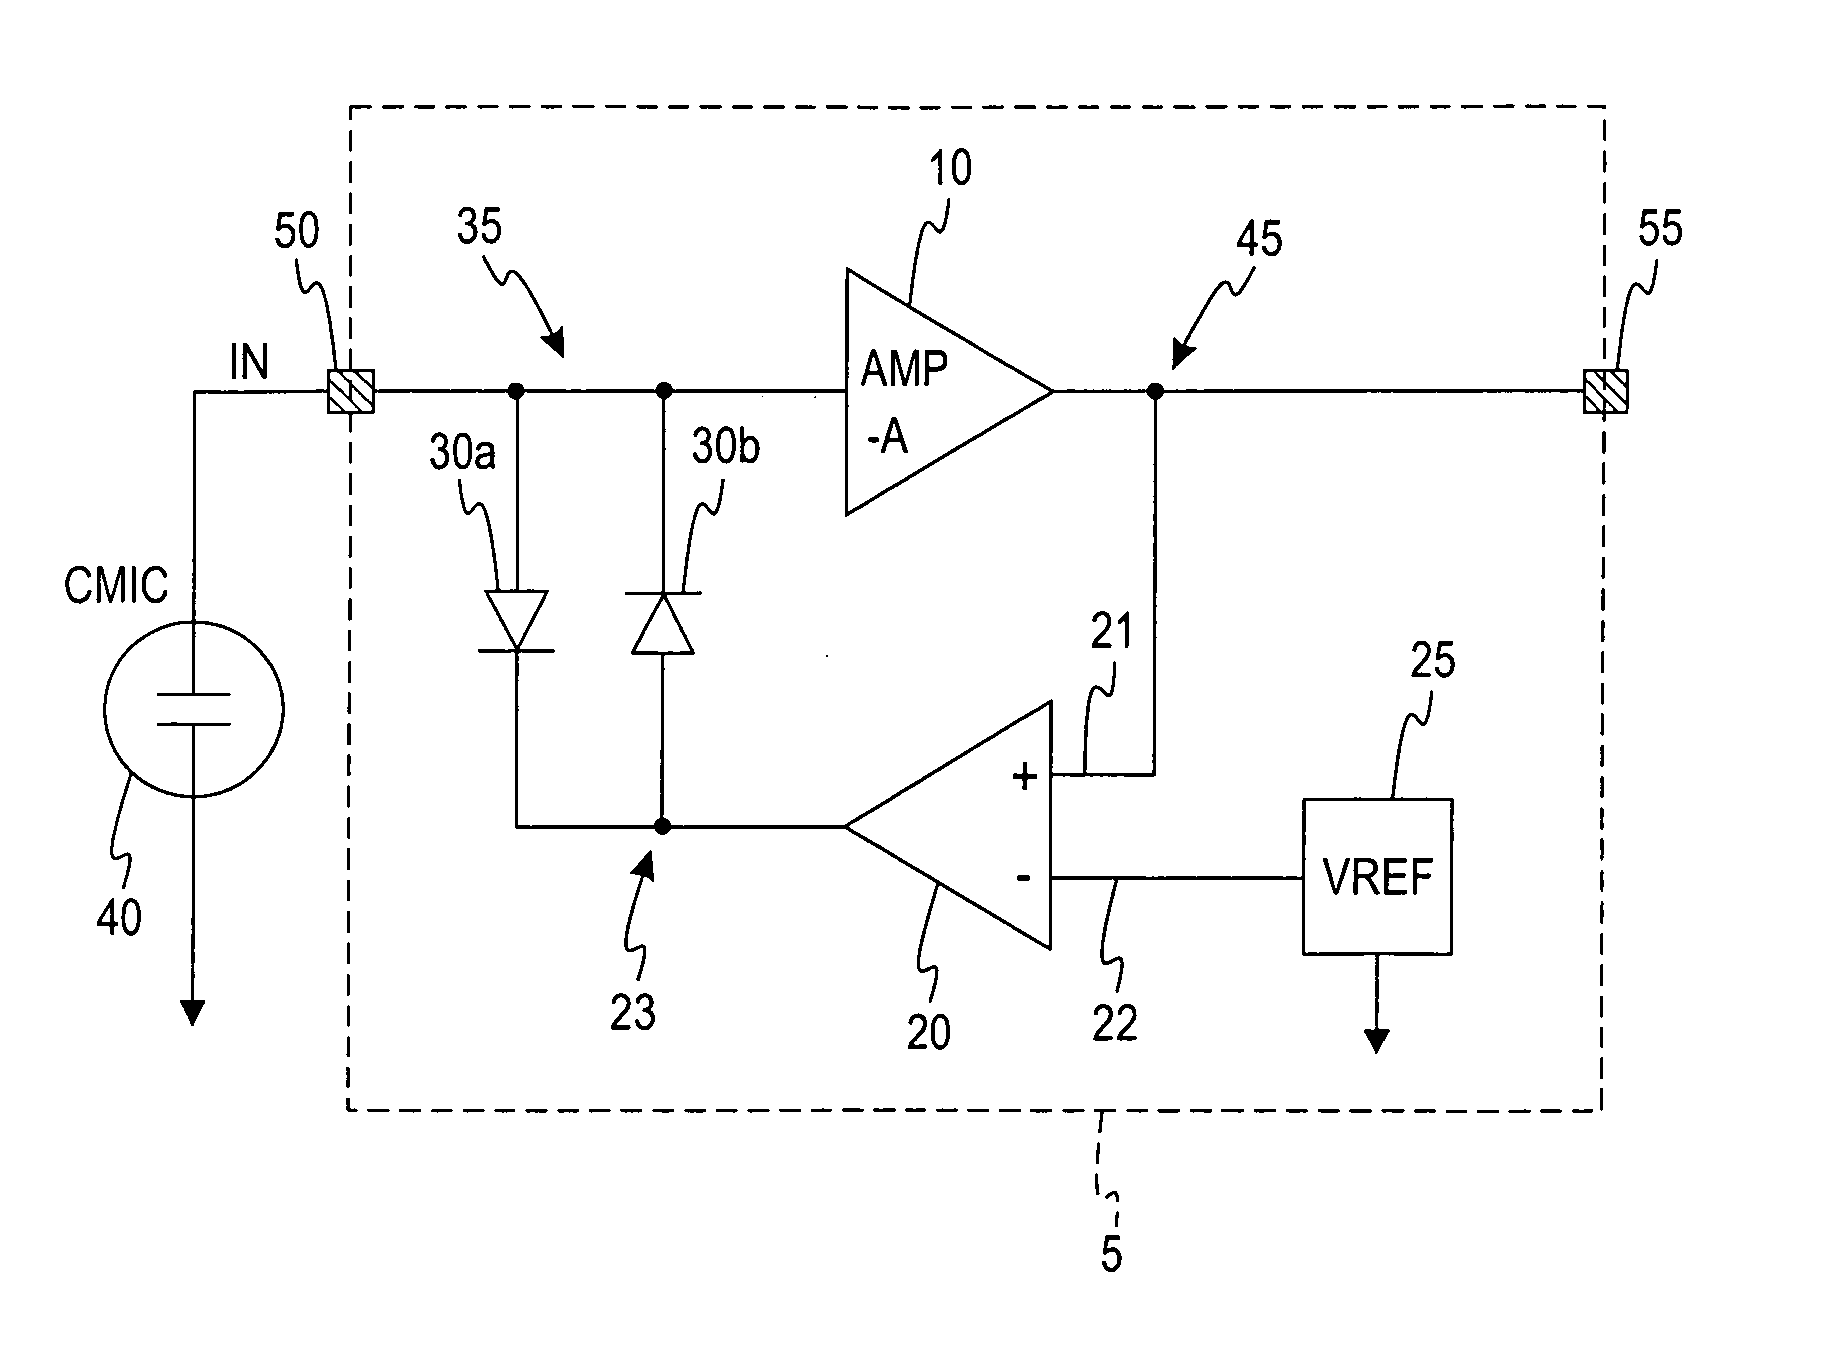 Amplifier circuit for capacitive transducers